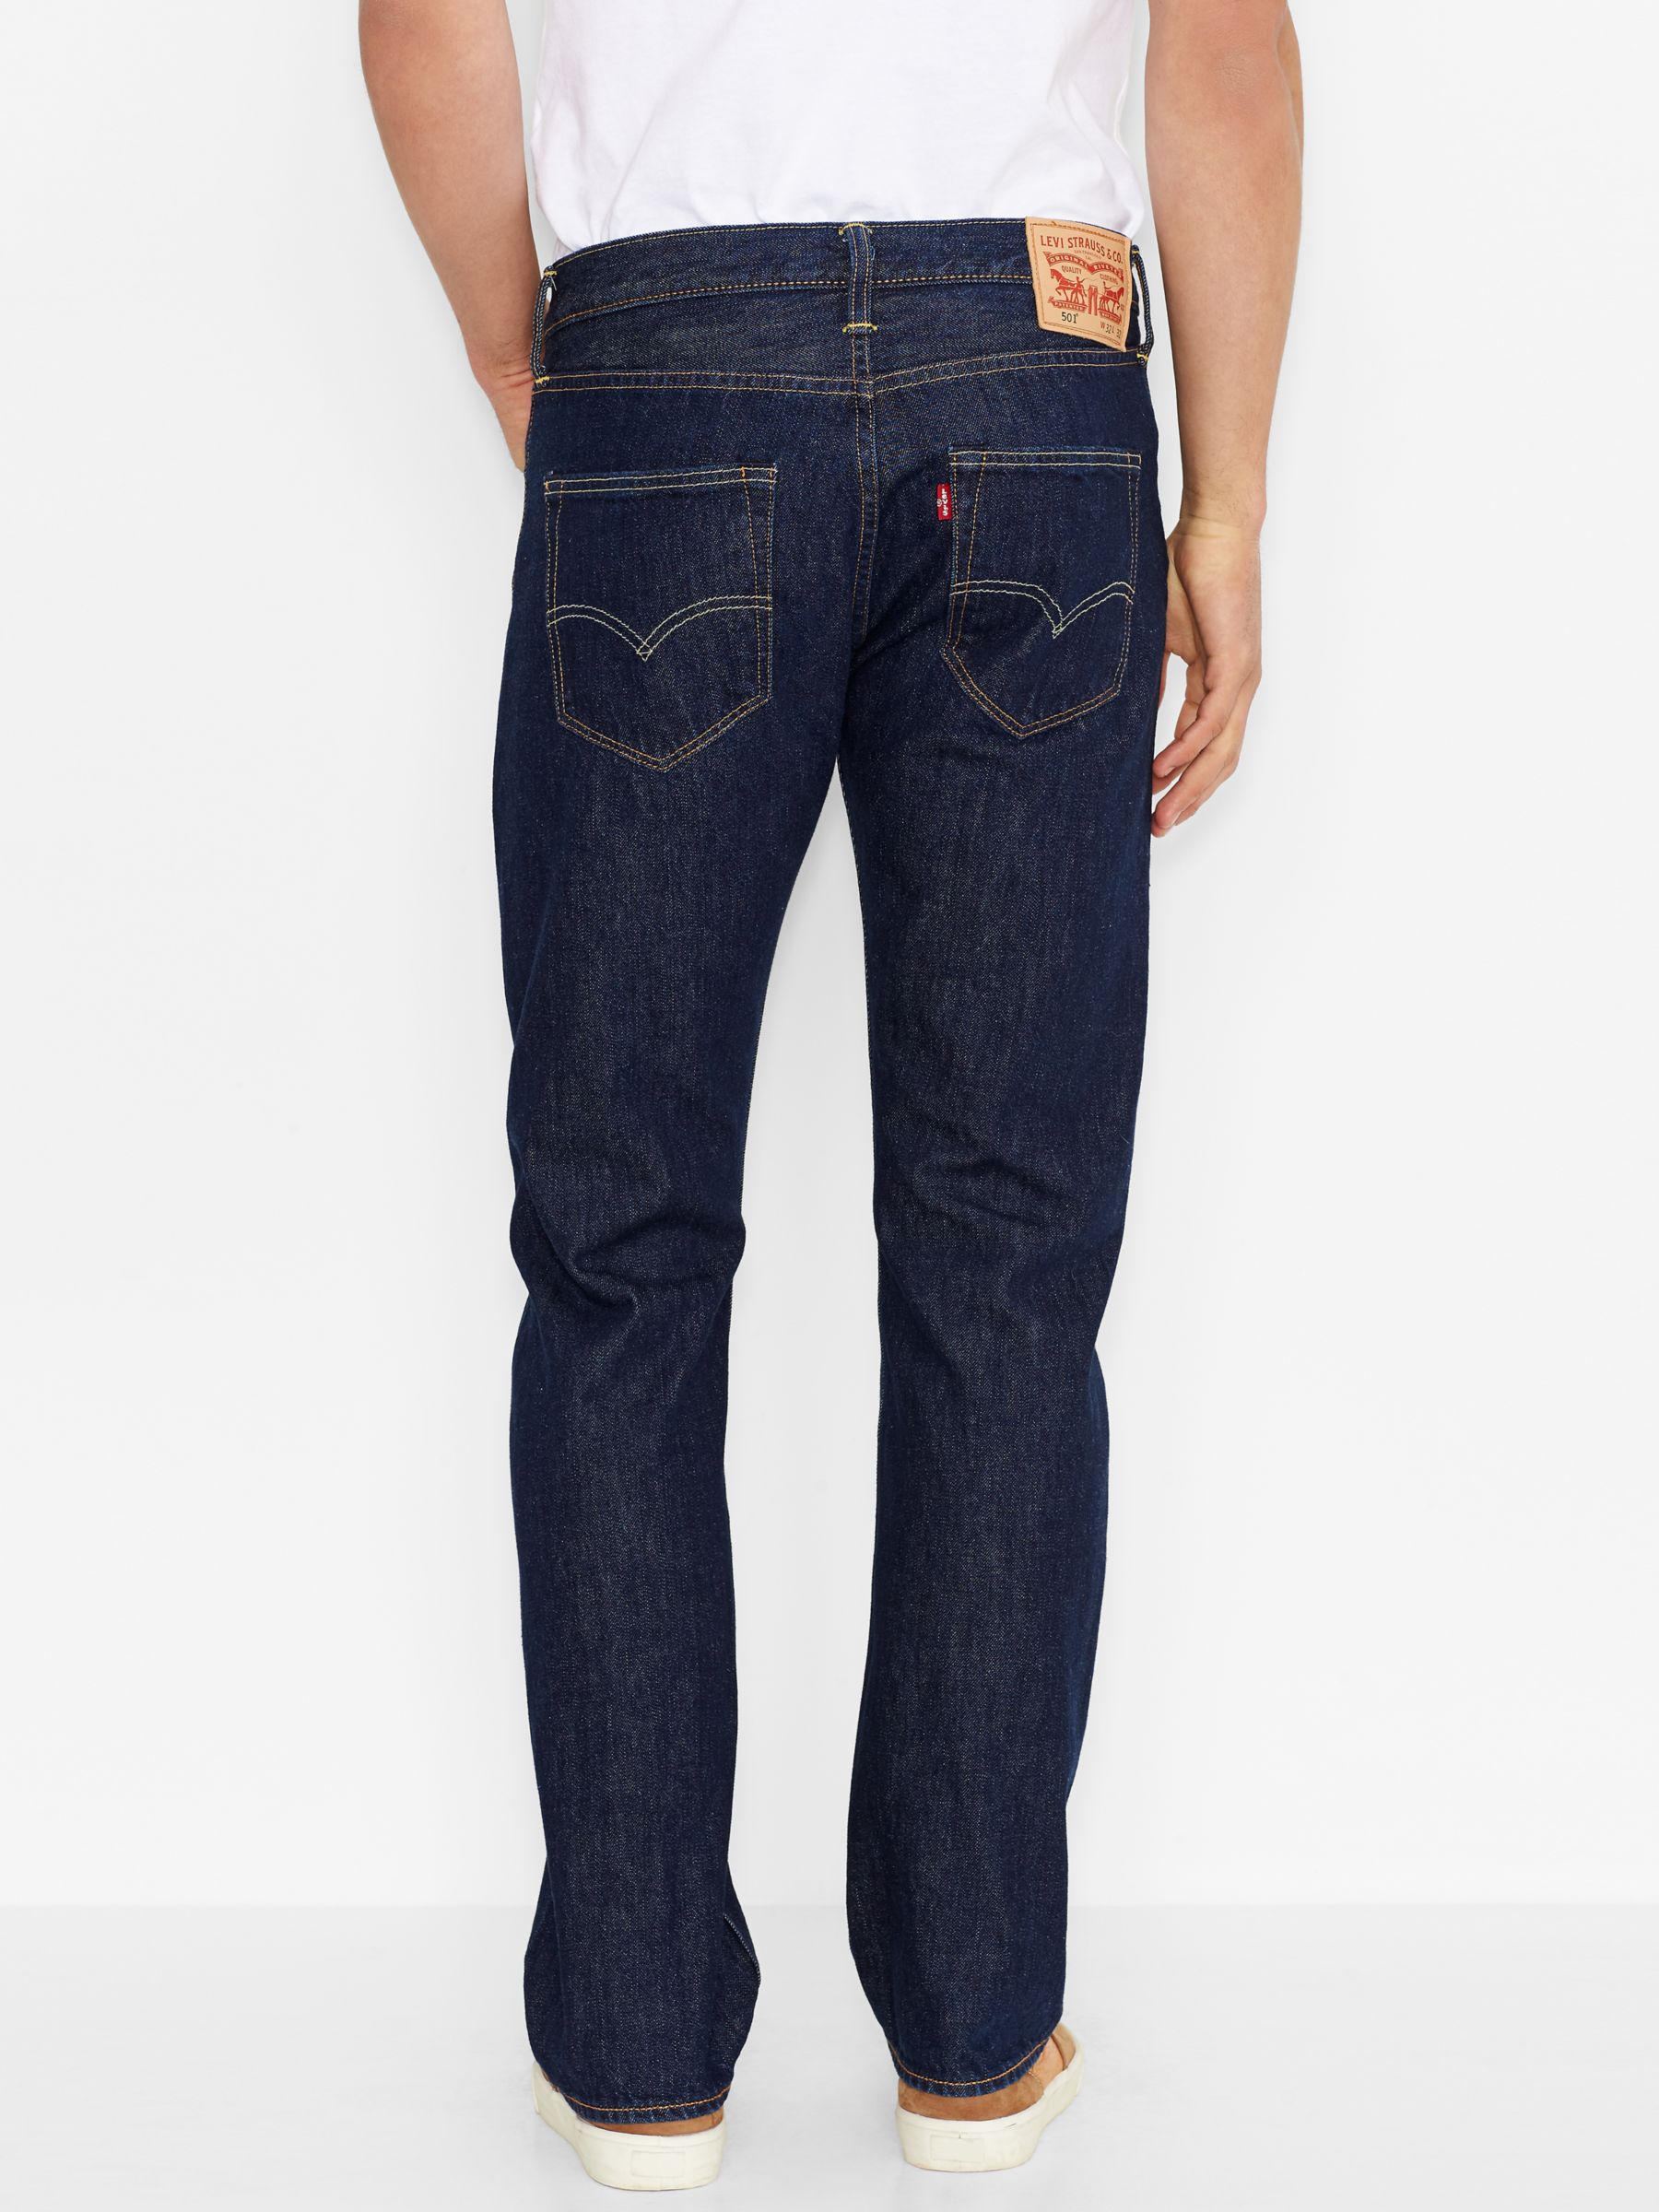 Levi's 501 Original Straight Jeans, One Wash at John Lewis